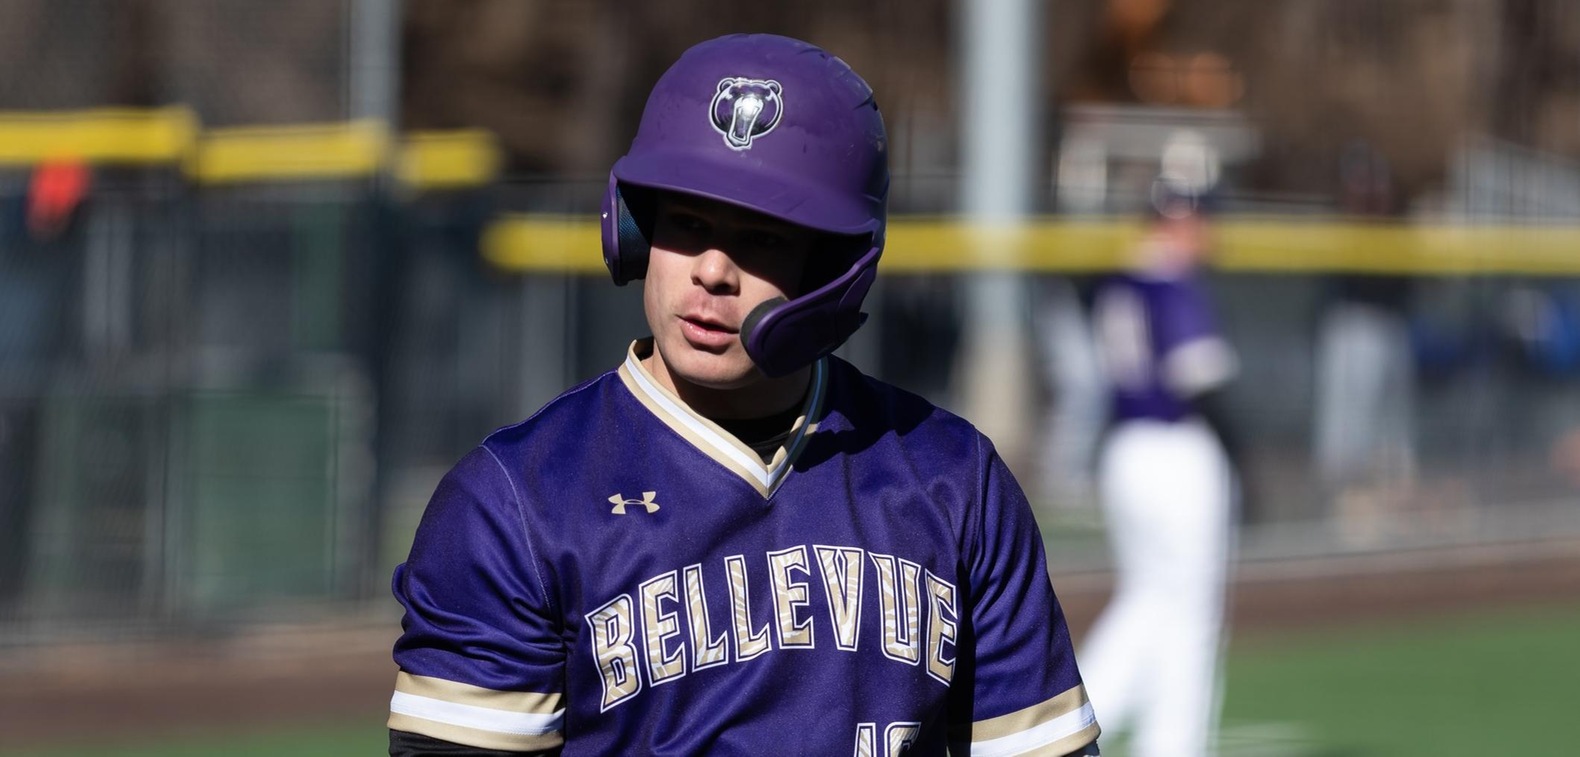 Alec Ackerman went 4-6 with a homer and three RBI on the day.